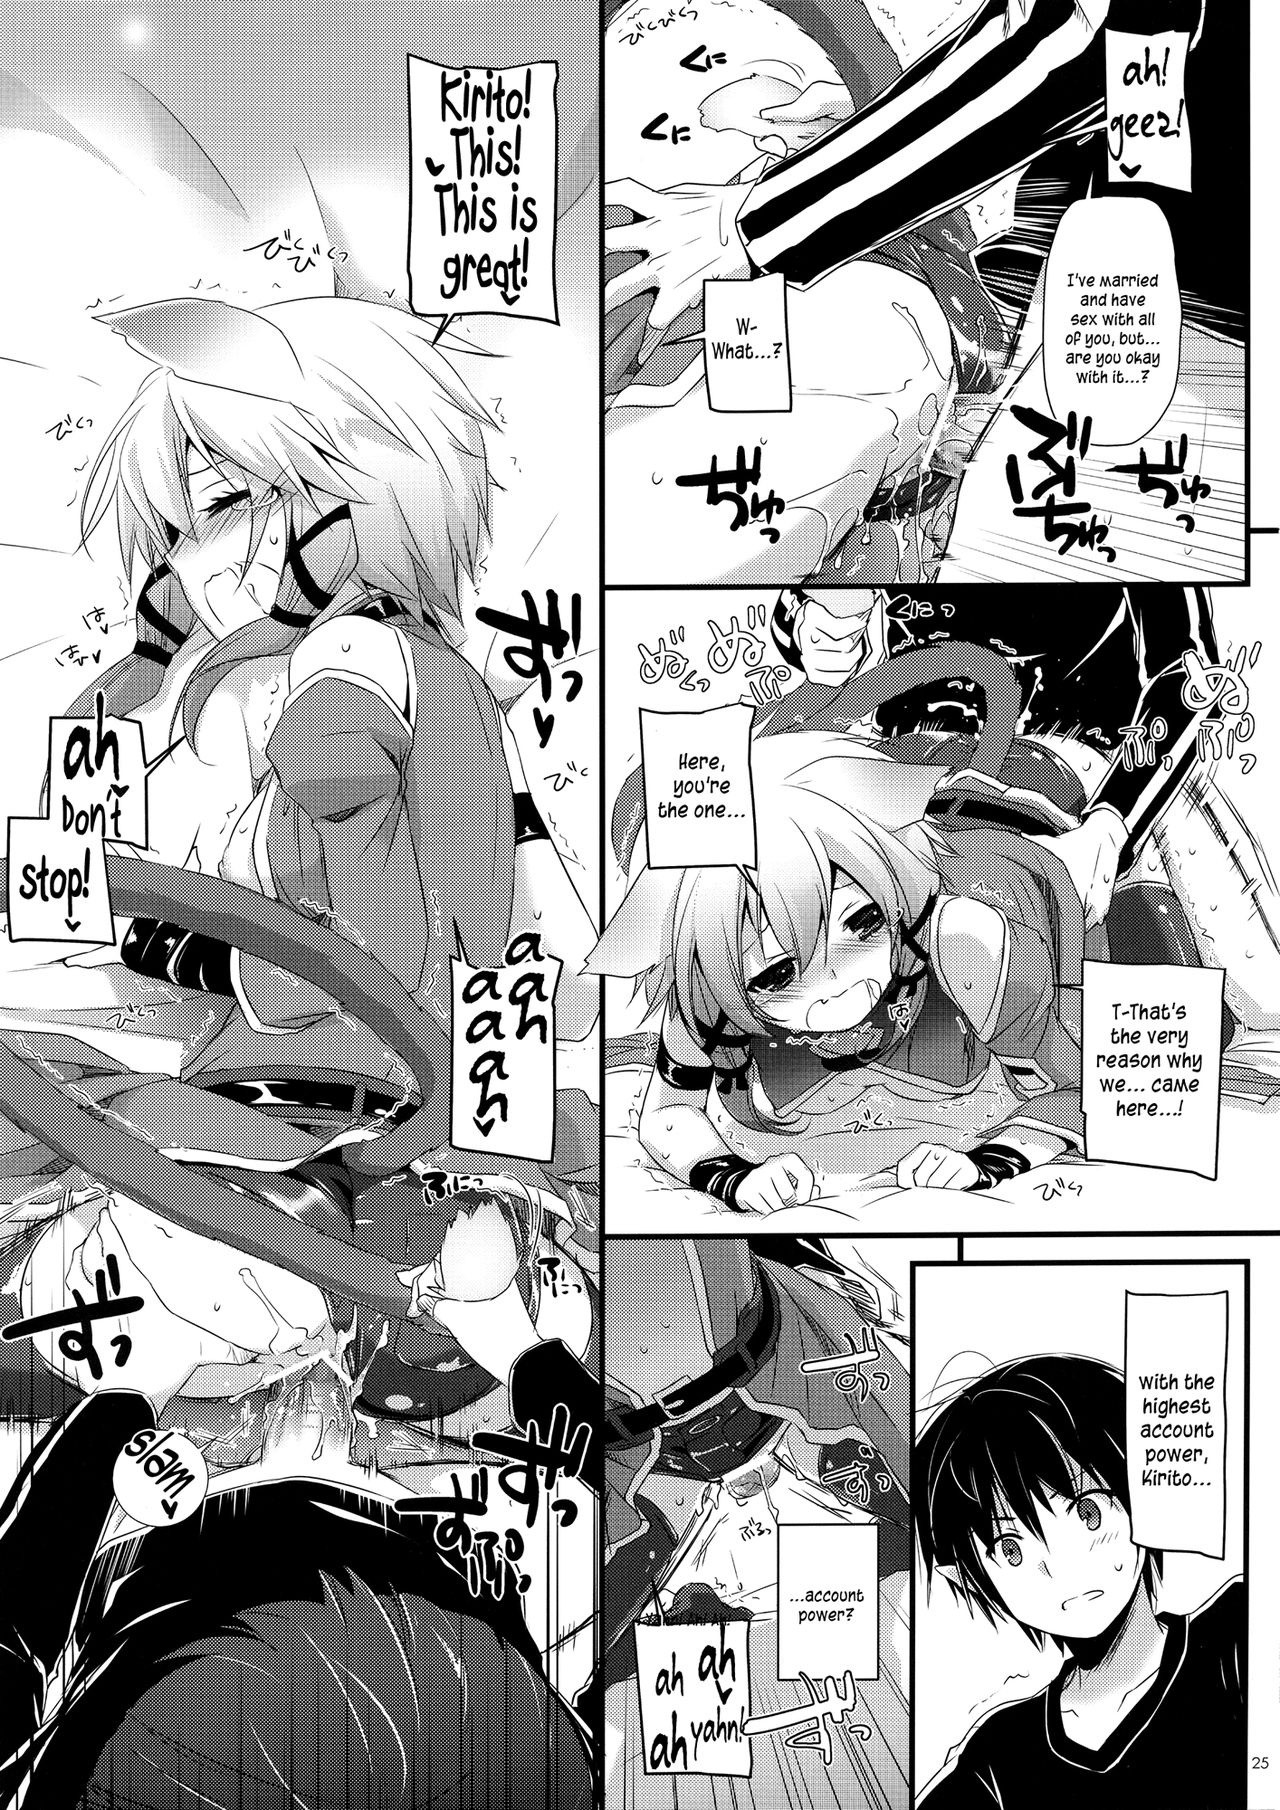 D.L. Action 72 hentai manga picture 24